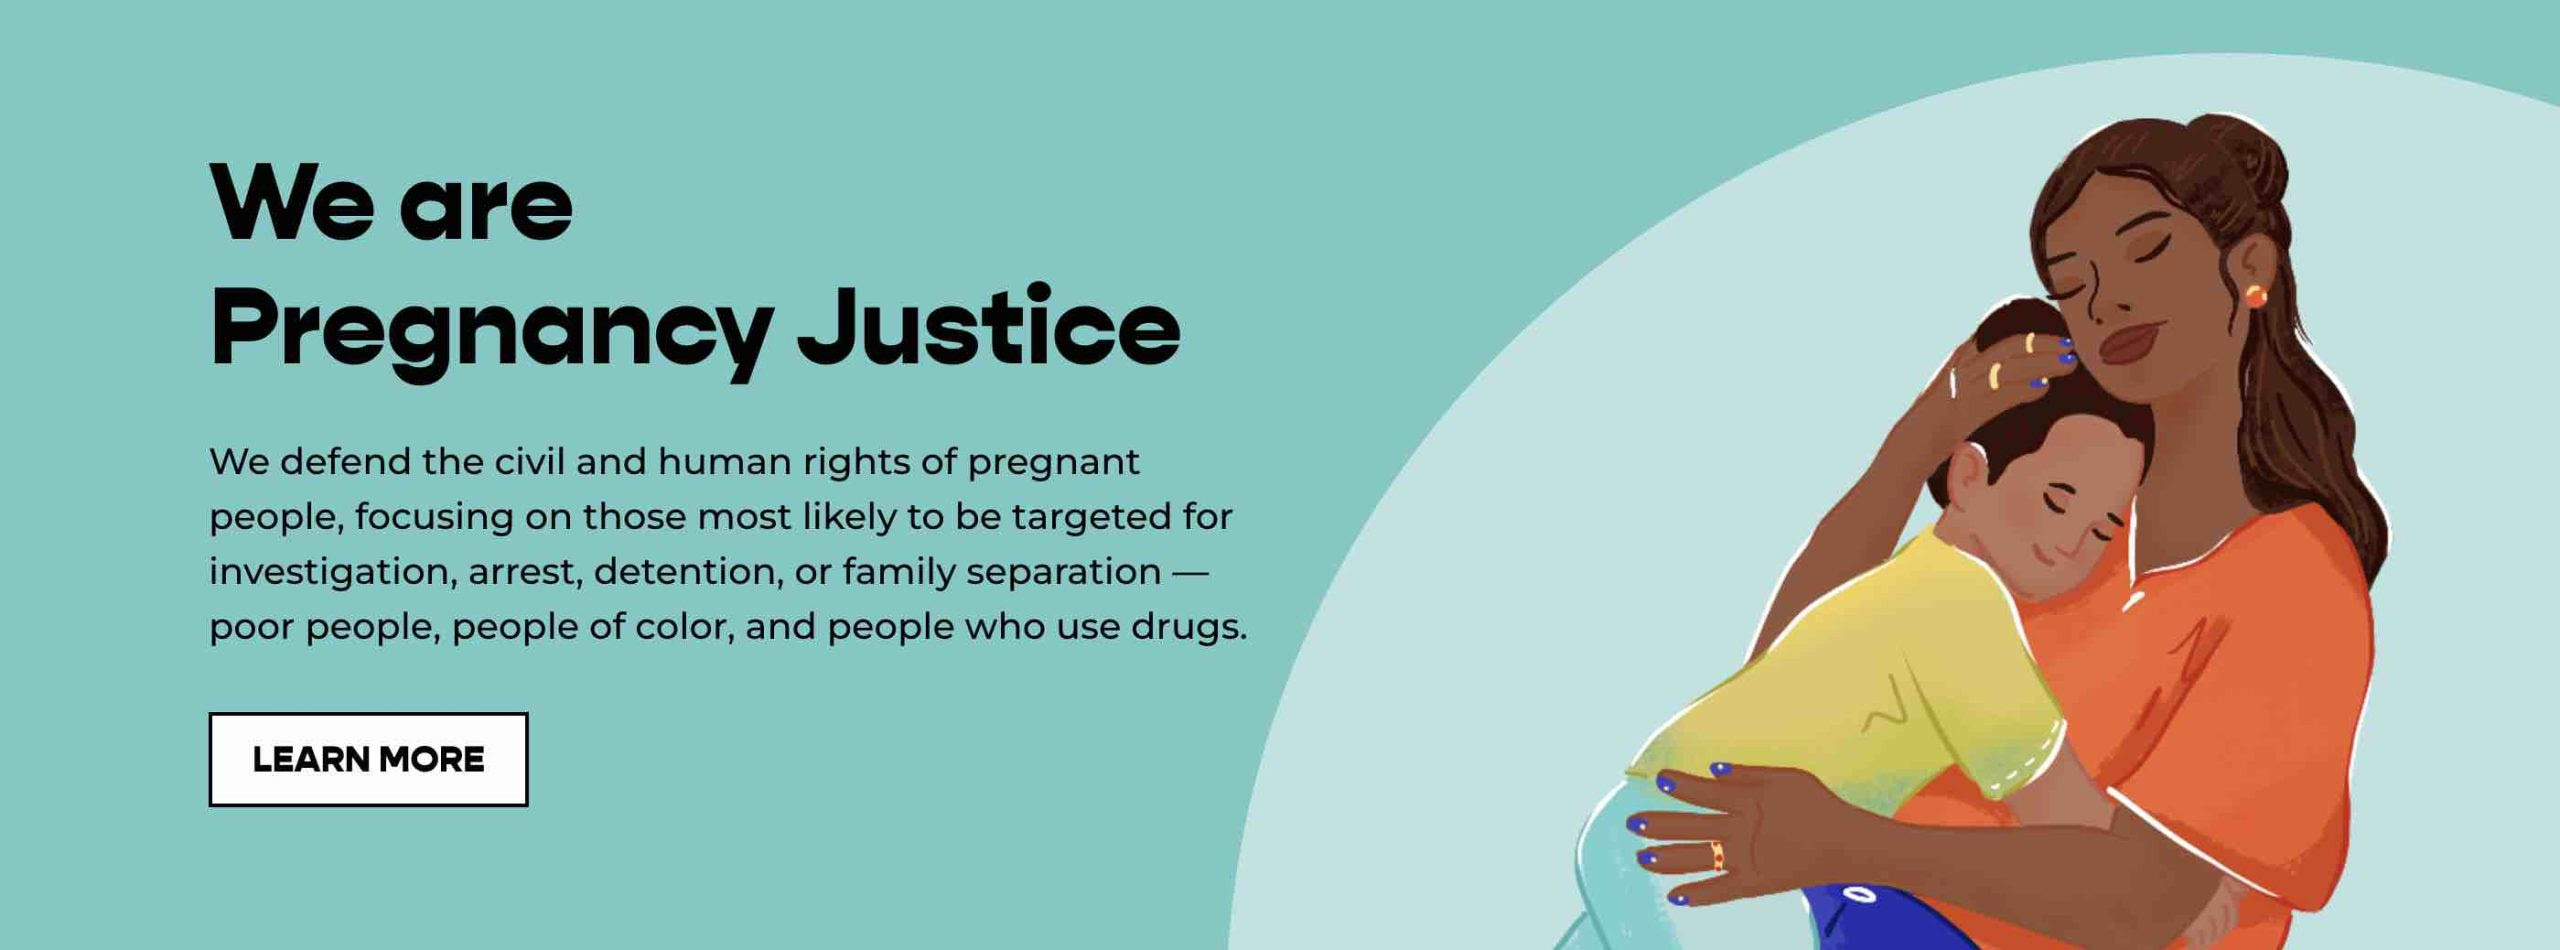 Pregnancy Justice has defended clients against pregnancy-related criminal charges for decades and will persevere.